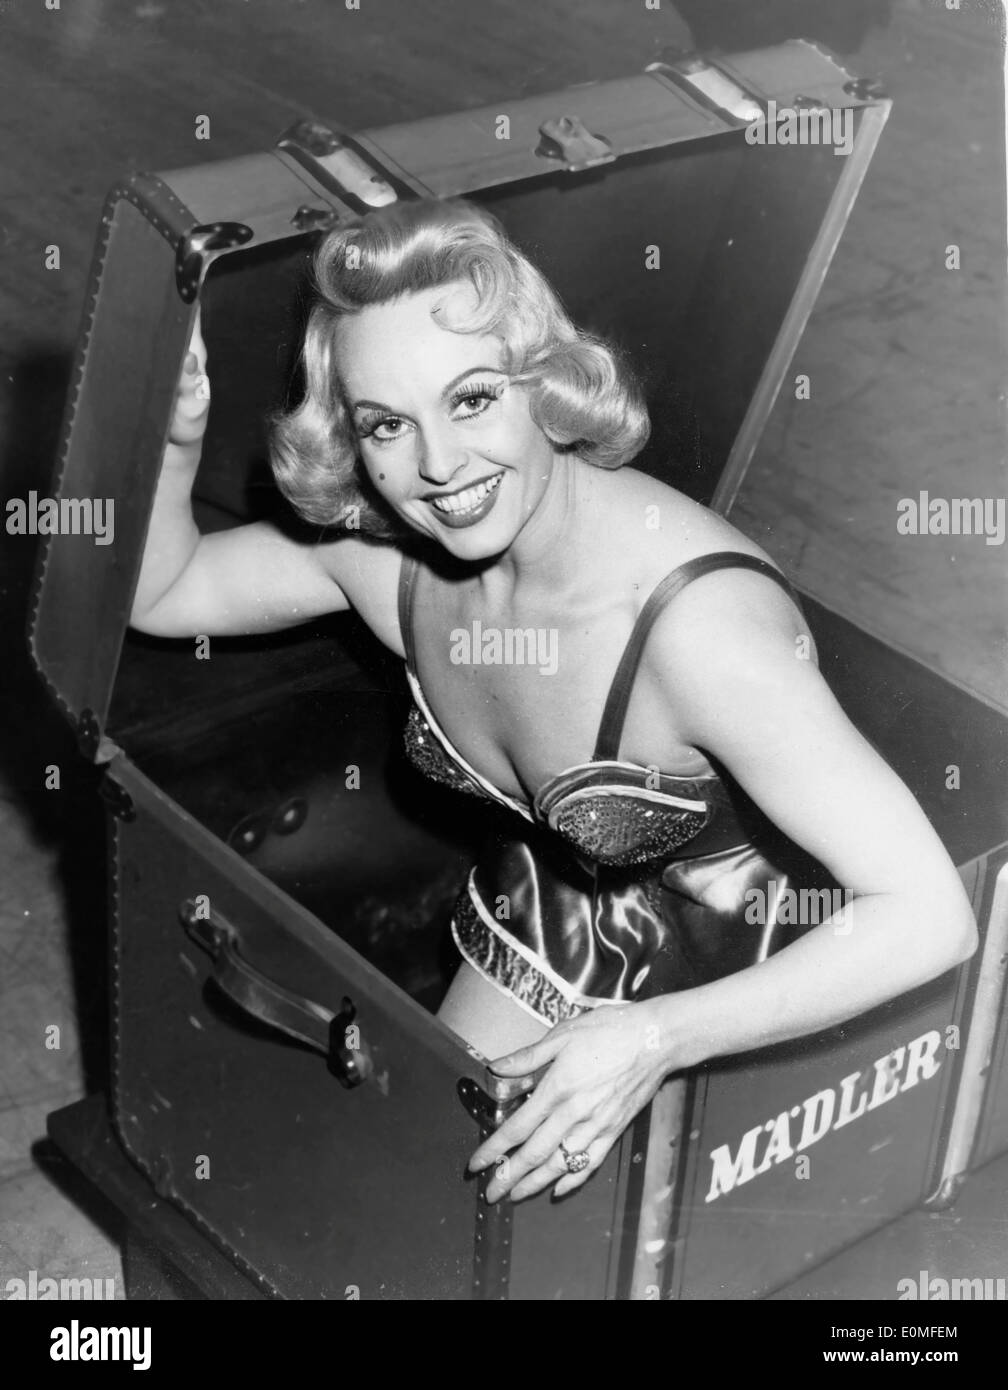 Feb 25, 1955; Manchester, UK; Blonde GLORIA DE VOSS, daughter of a Swedish (Stockholm) Chief of Police is an expert escapist Stock Photo